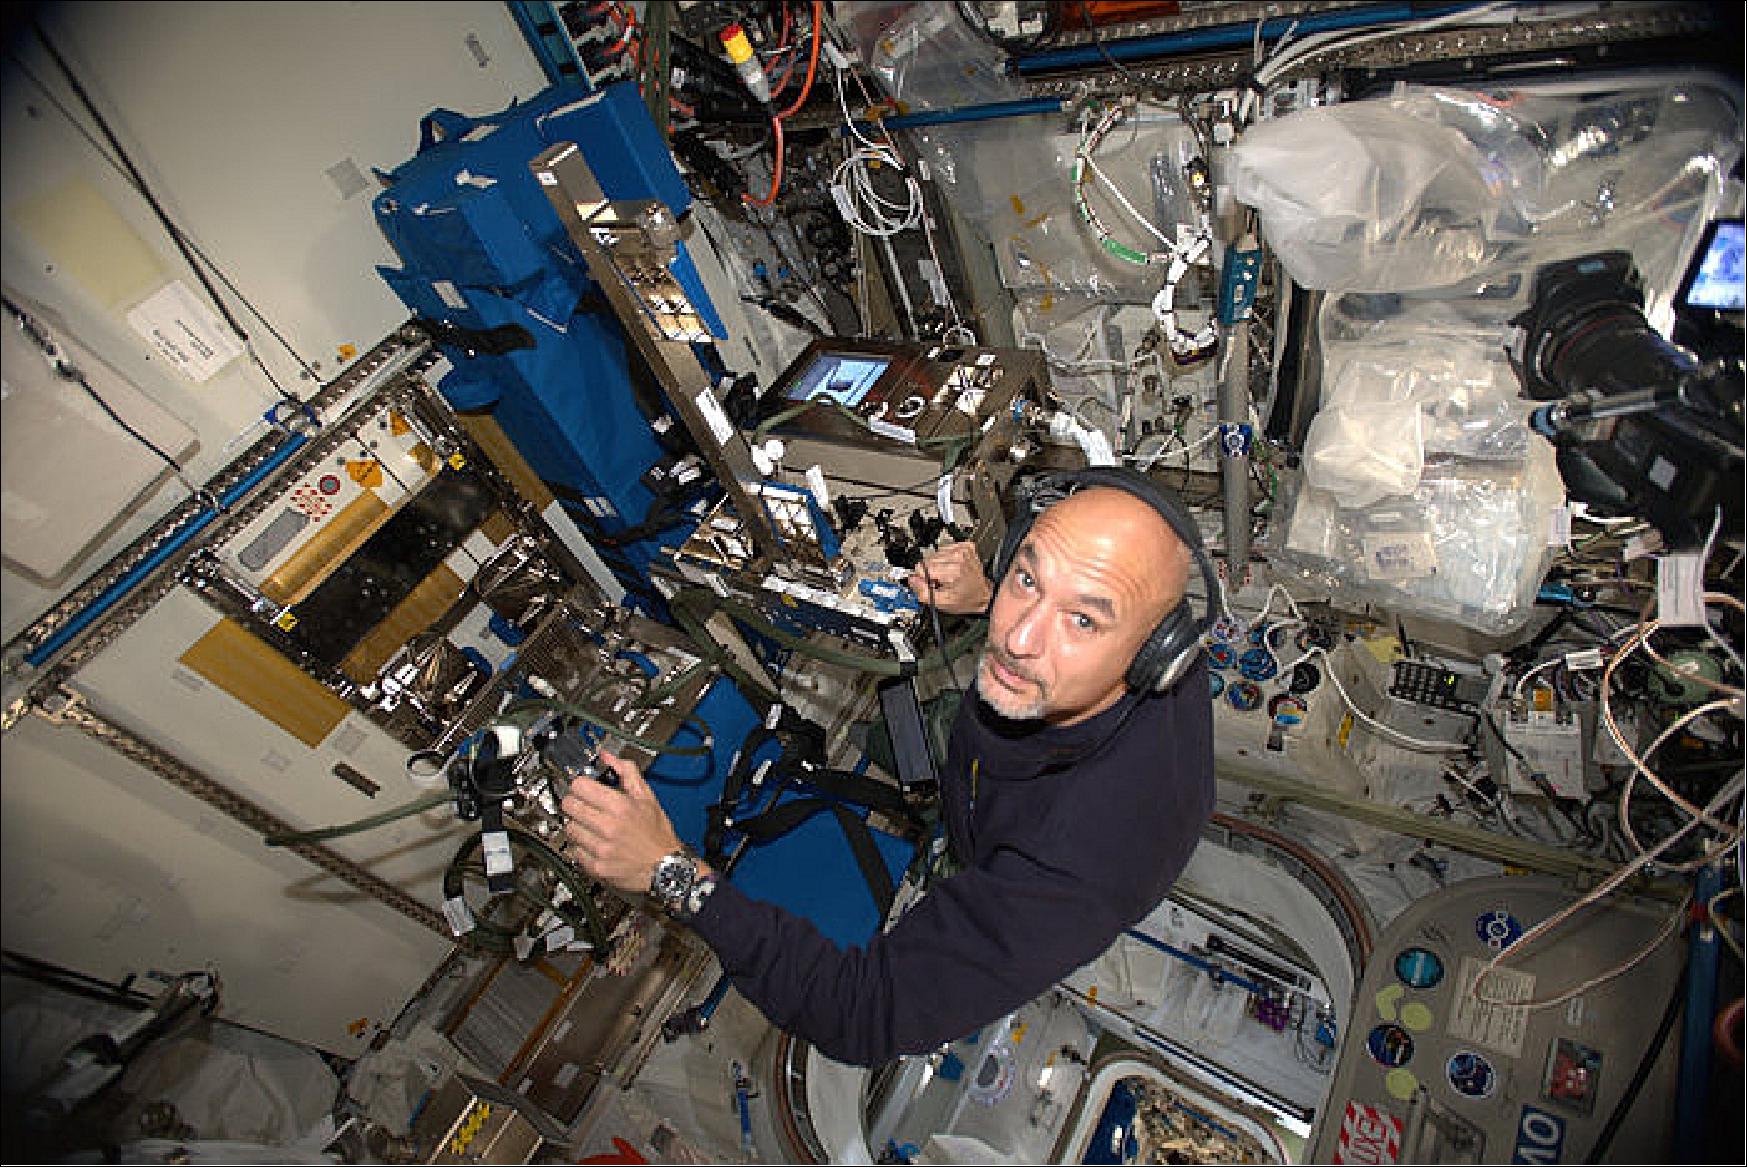 Figure 67: ESA astronaut Luca Parmitano performs a European experiment called GRIP that studies astronauts' perception of mass and movement and how they interface with the human body and change in microgravity (image credit: ESA/NASA)